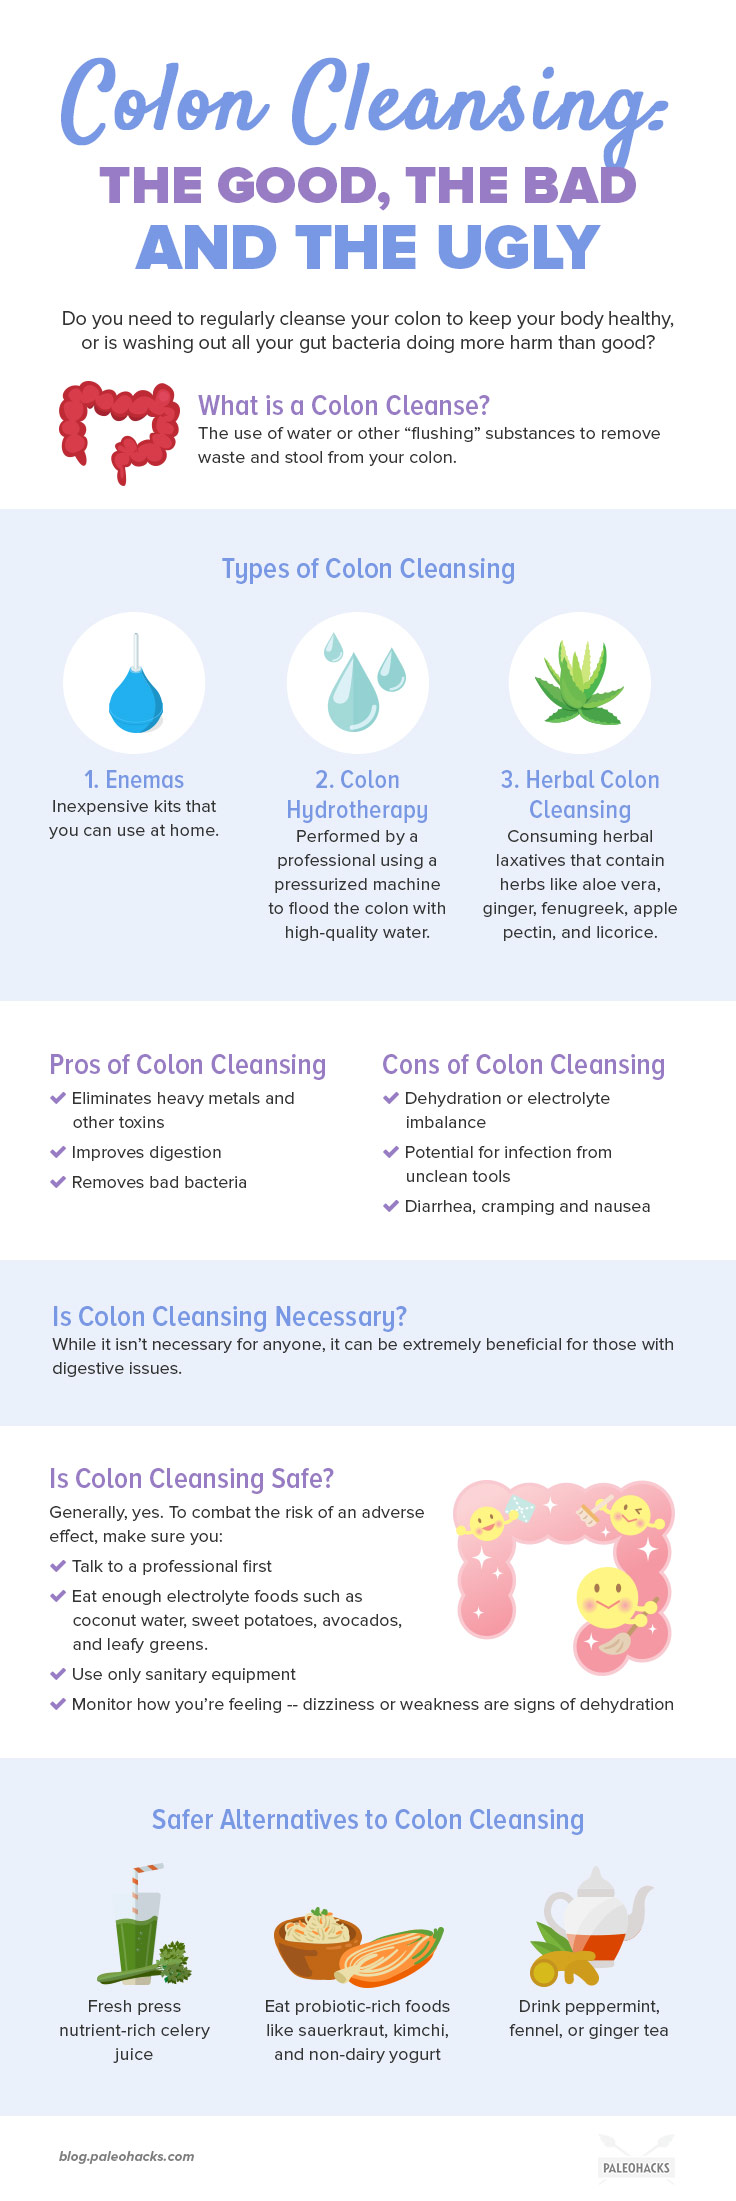 Do you need to regularly cleanse your colon to keep your body healthy, or is washing out all your gut bacteria doing more harm than good?